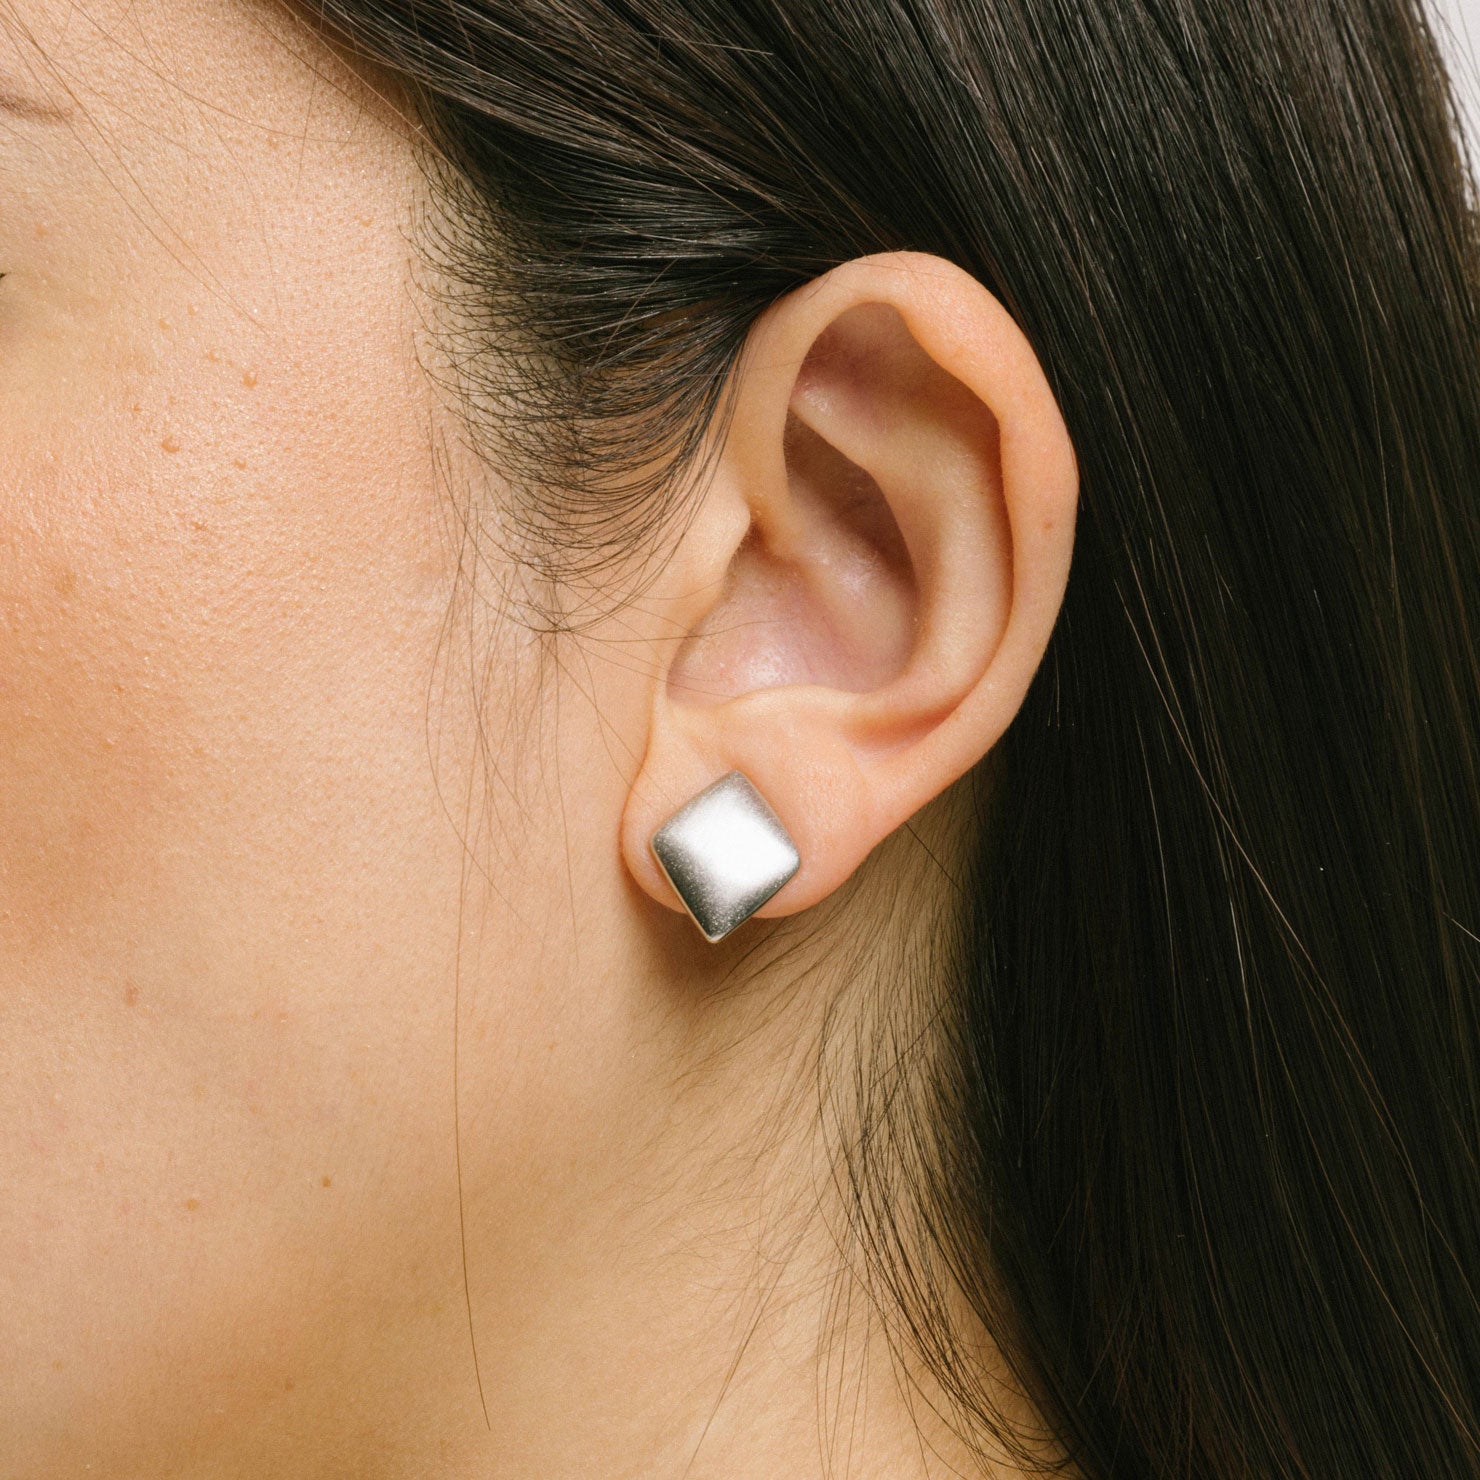 A model wearing the Negroni Clip On Earrings feature a Mosquito Coil Clip-On design, making them suitable for all ear types. Keep them on for up to 24 hours without discomfort, thanks to medium-strength secure hold and adjustable padding. Crafted from a Silver Toned Copper Alloy, each purchase contains one pair.